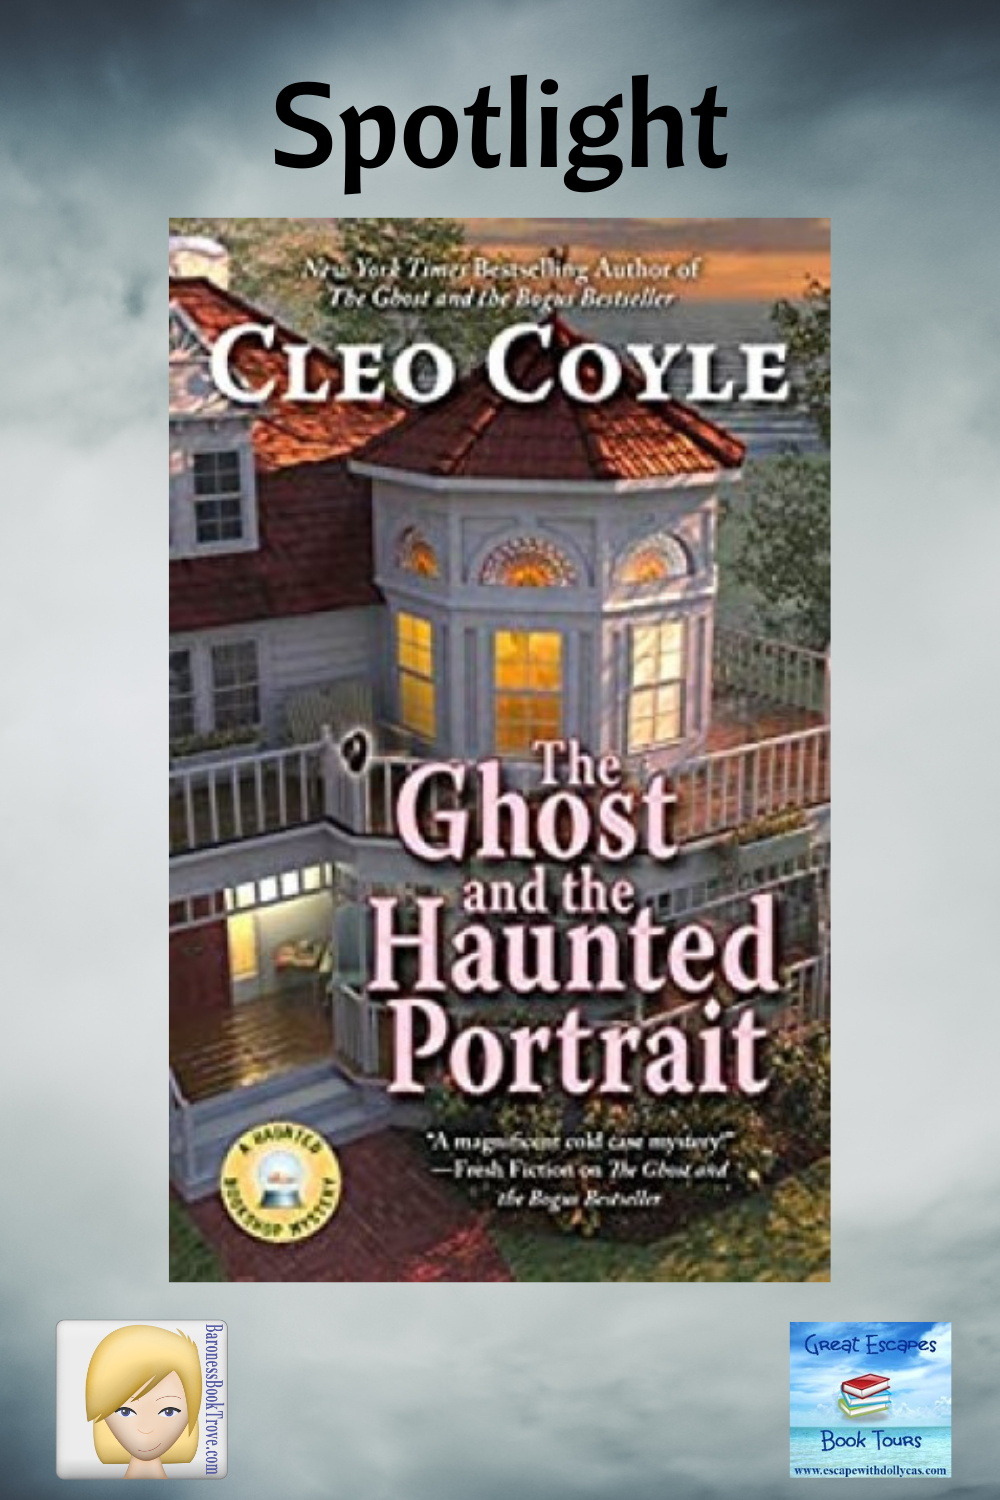 The Ghost and the Stolen Tears by Cleo Coyle